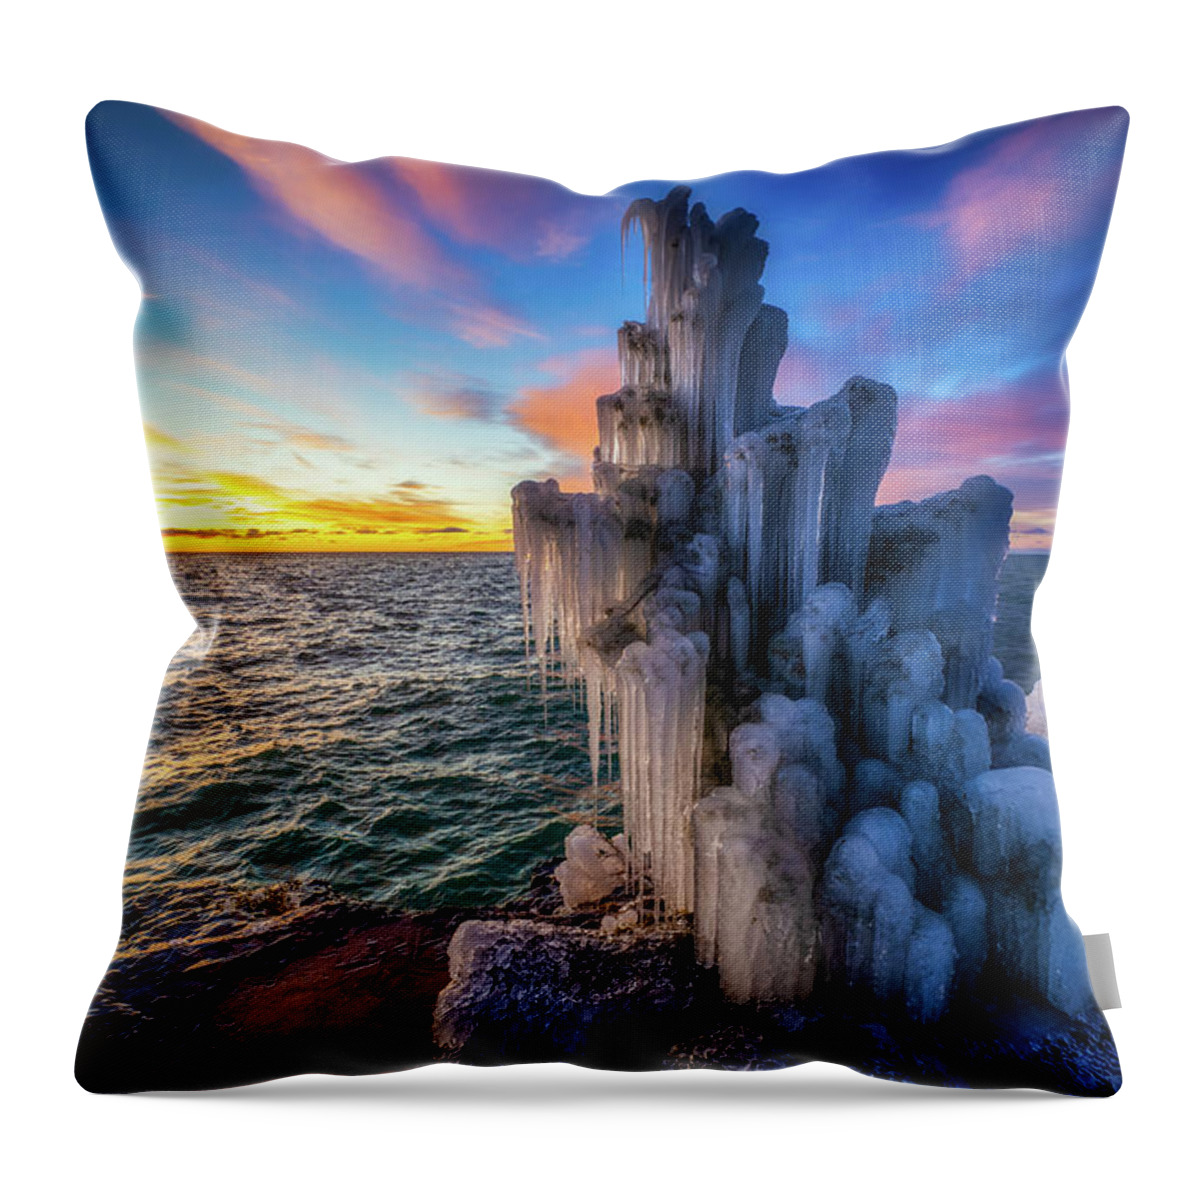 Door County Throw Pillow featuring the photograph Frozen Sunrise by Brad Bellisle